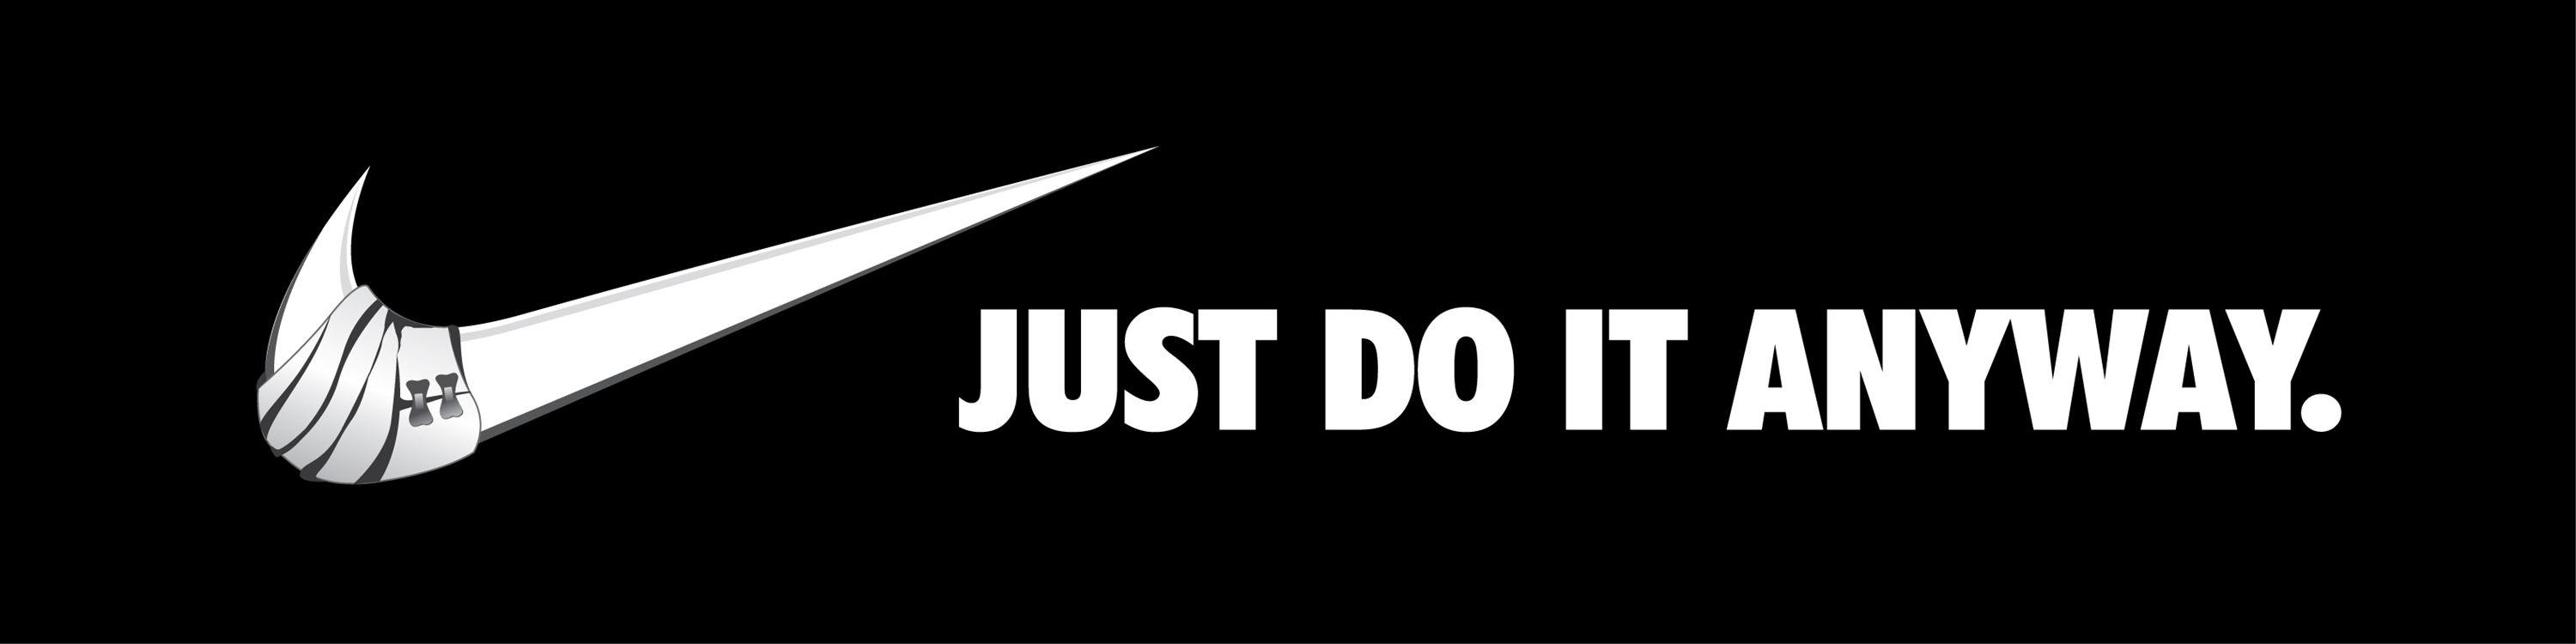 Just Do It Nike Logo - Nike Logo Wallpapers Just Do It - Wallpaper Cave